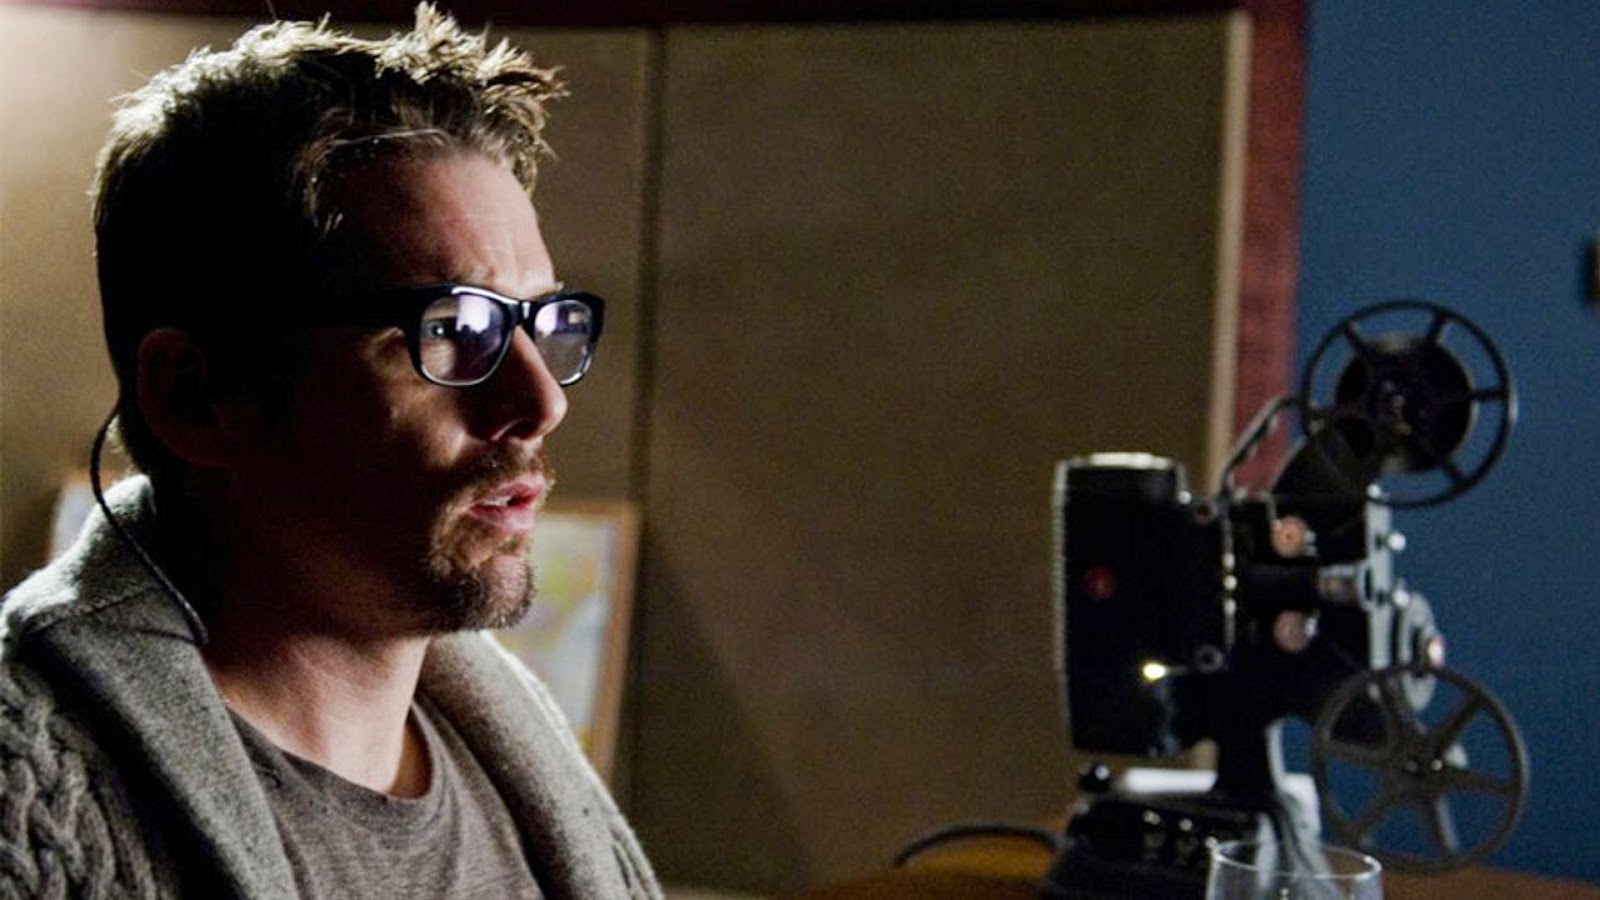 Sinister - Ethan Hawke watches as the horrors unfold | A Constantly Racing Mind